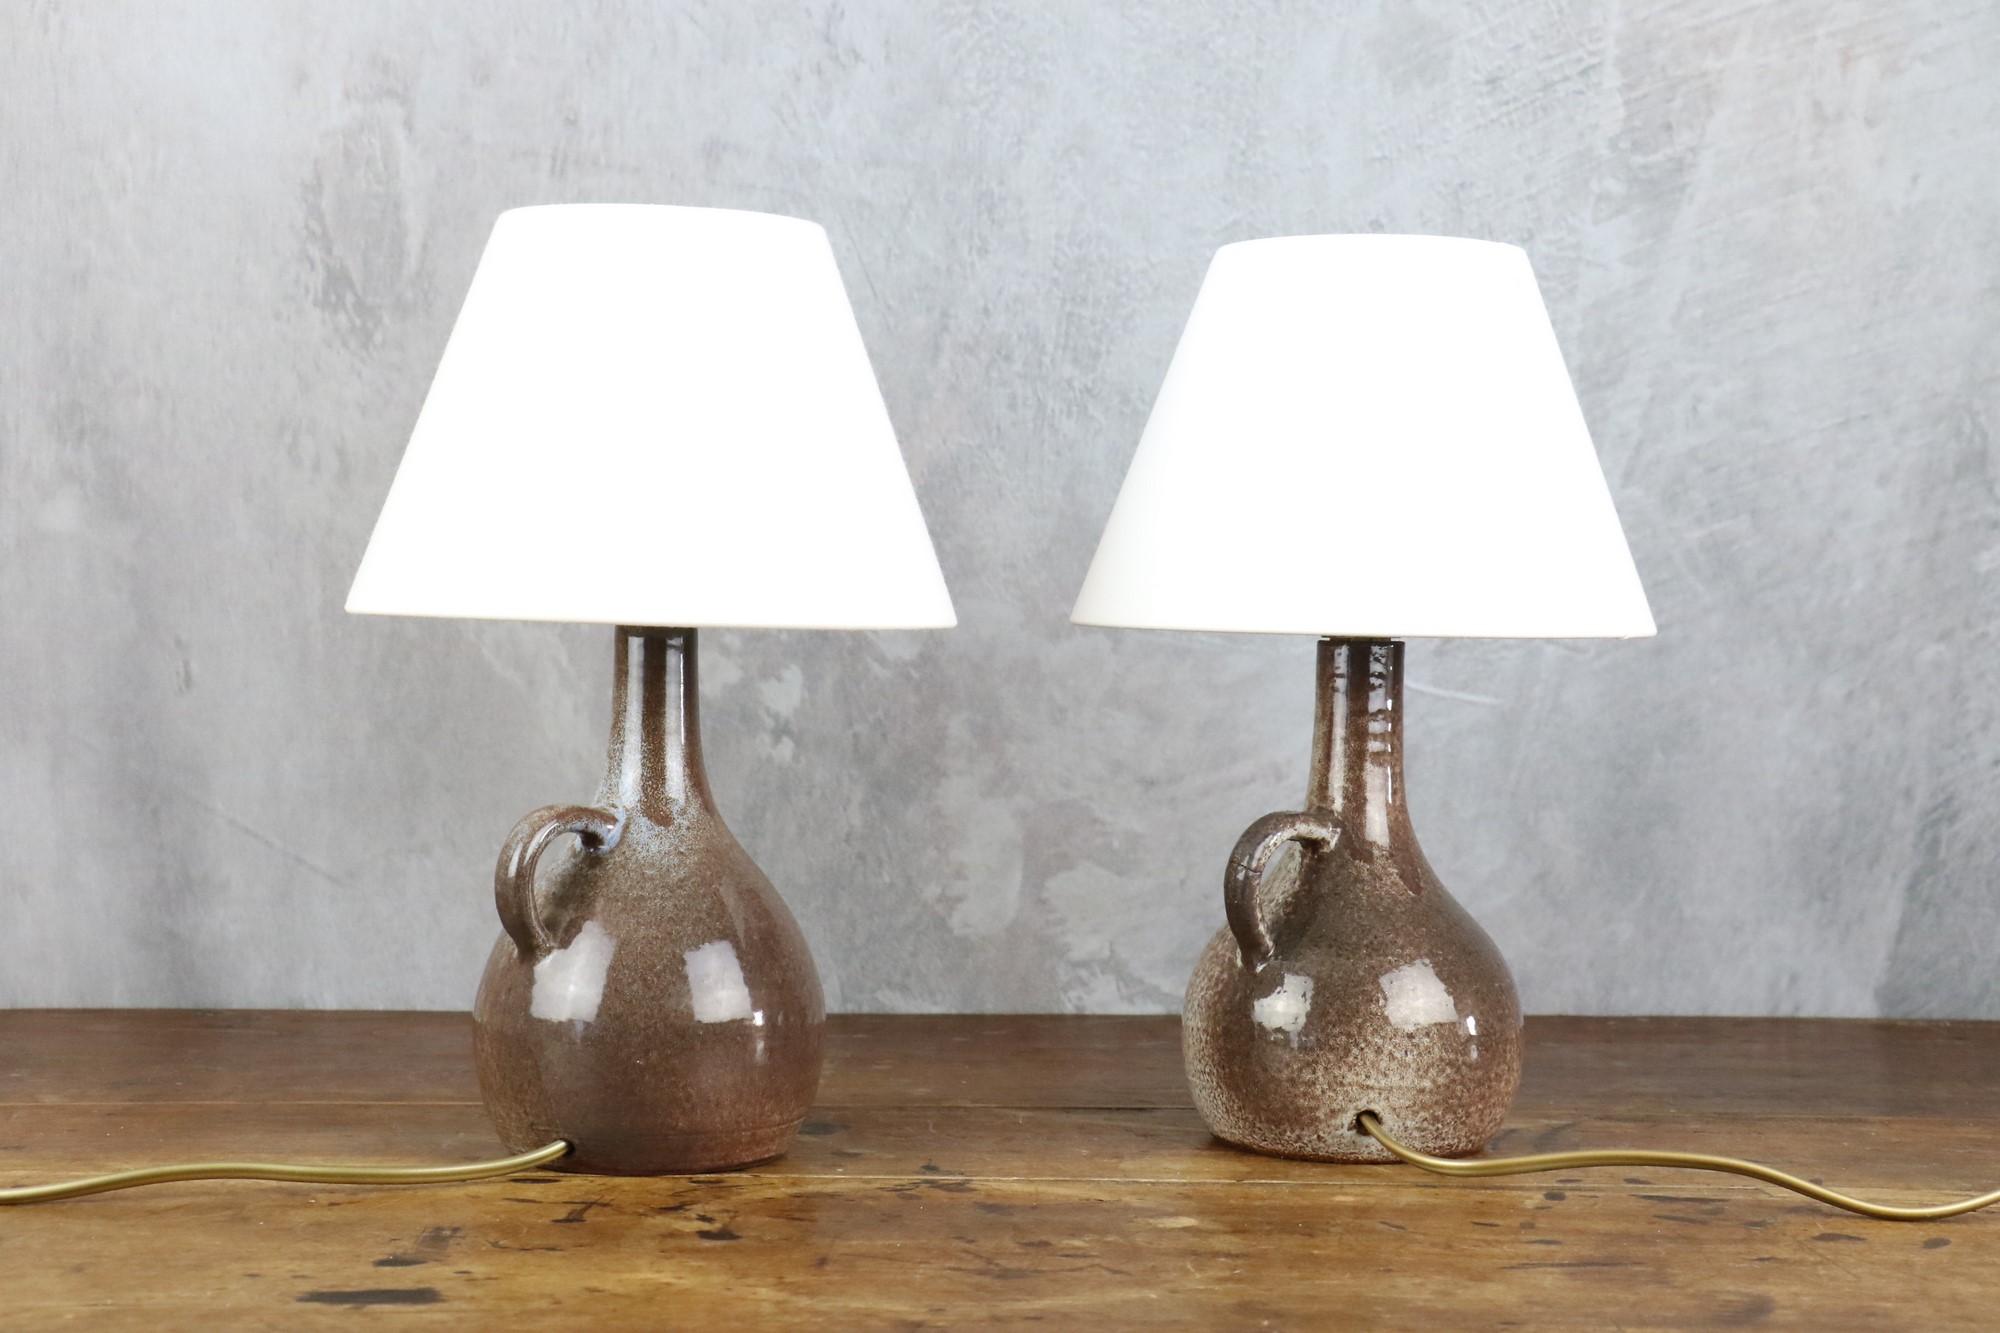 Pair of Mid-century ceramic lamps by Robert Chiazzo, 1960s For Sale 3